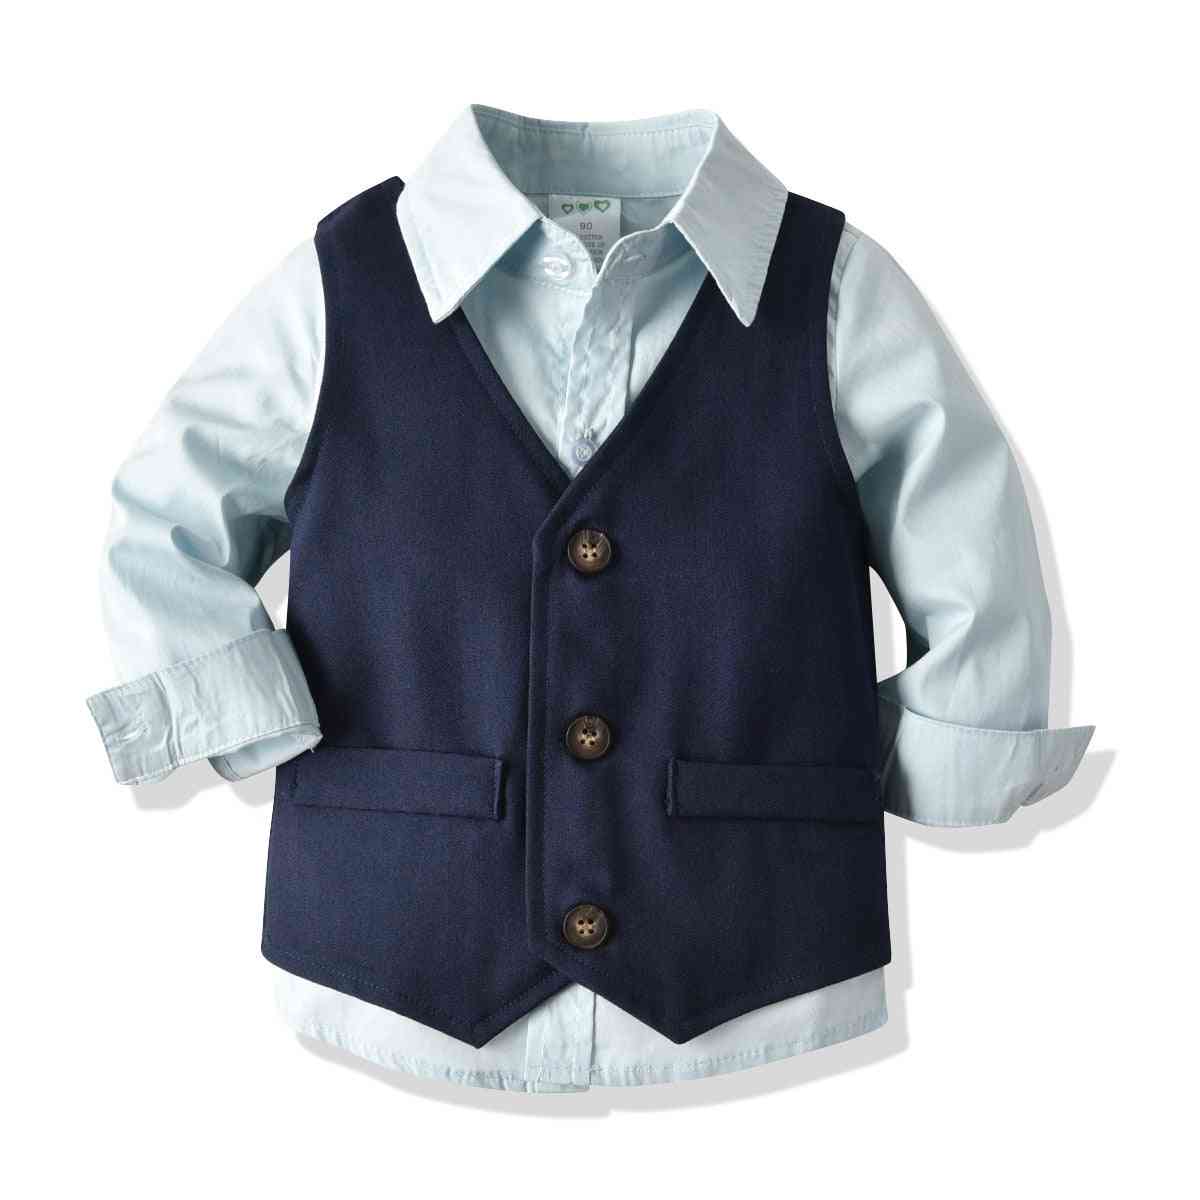 Blazer Suits, Formal School Suit, Outfits Clothing Sets For